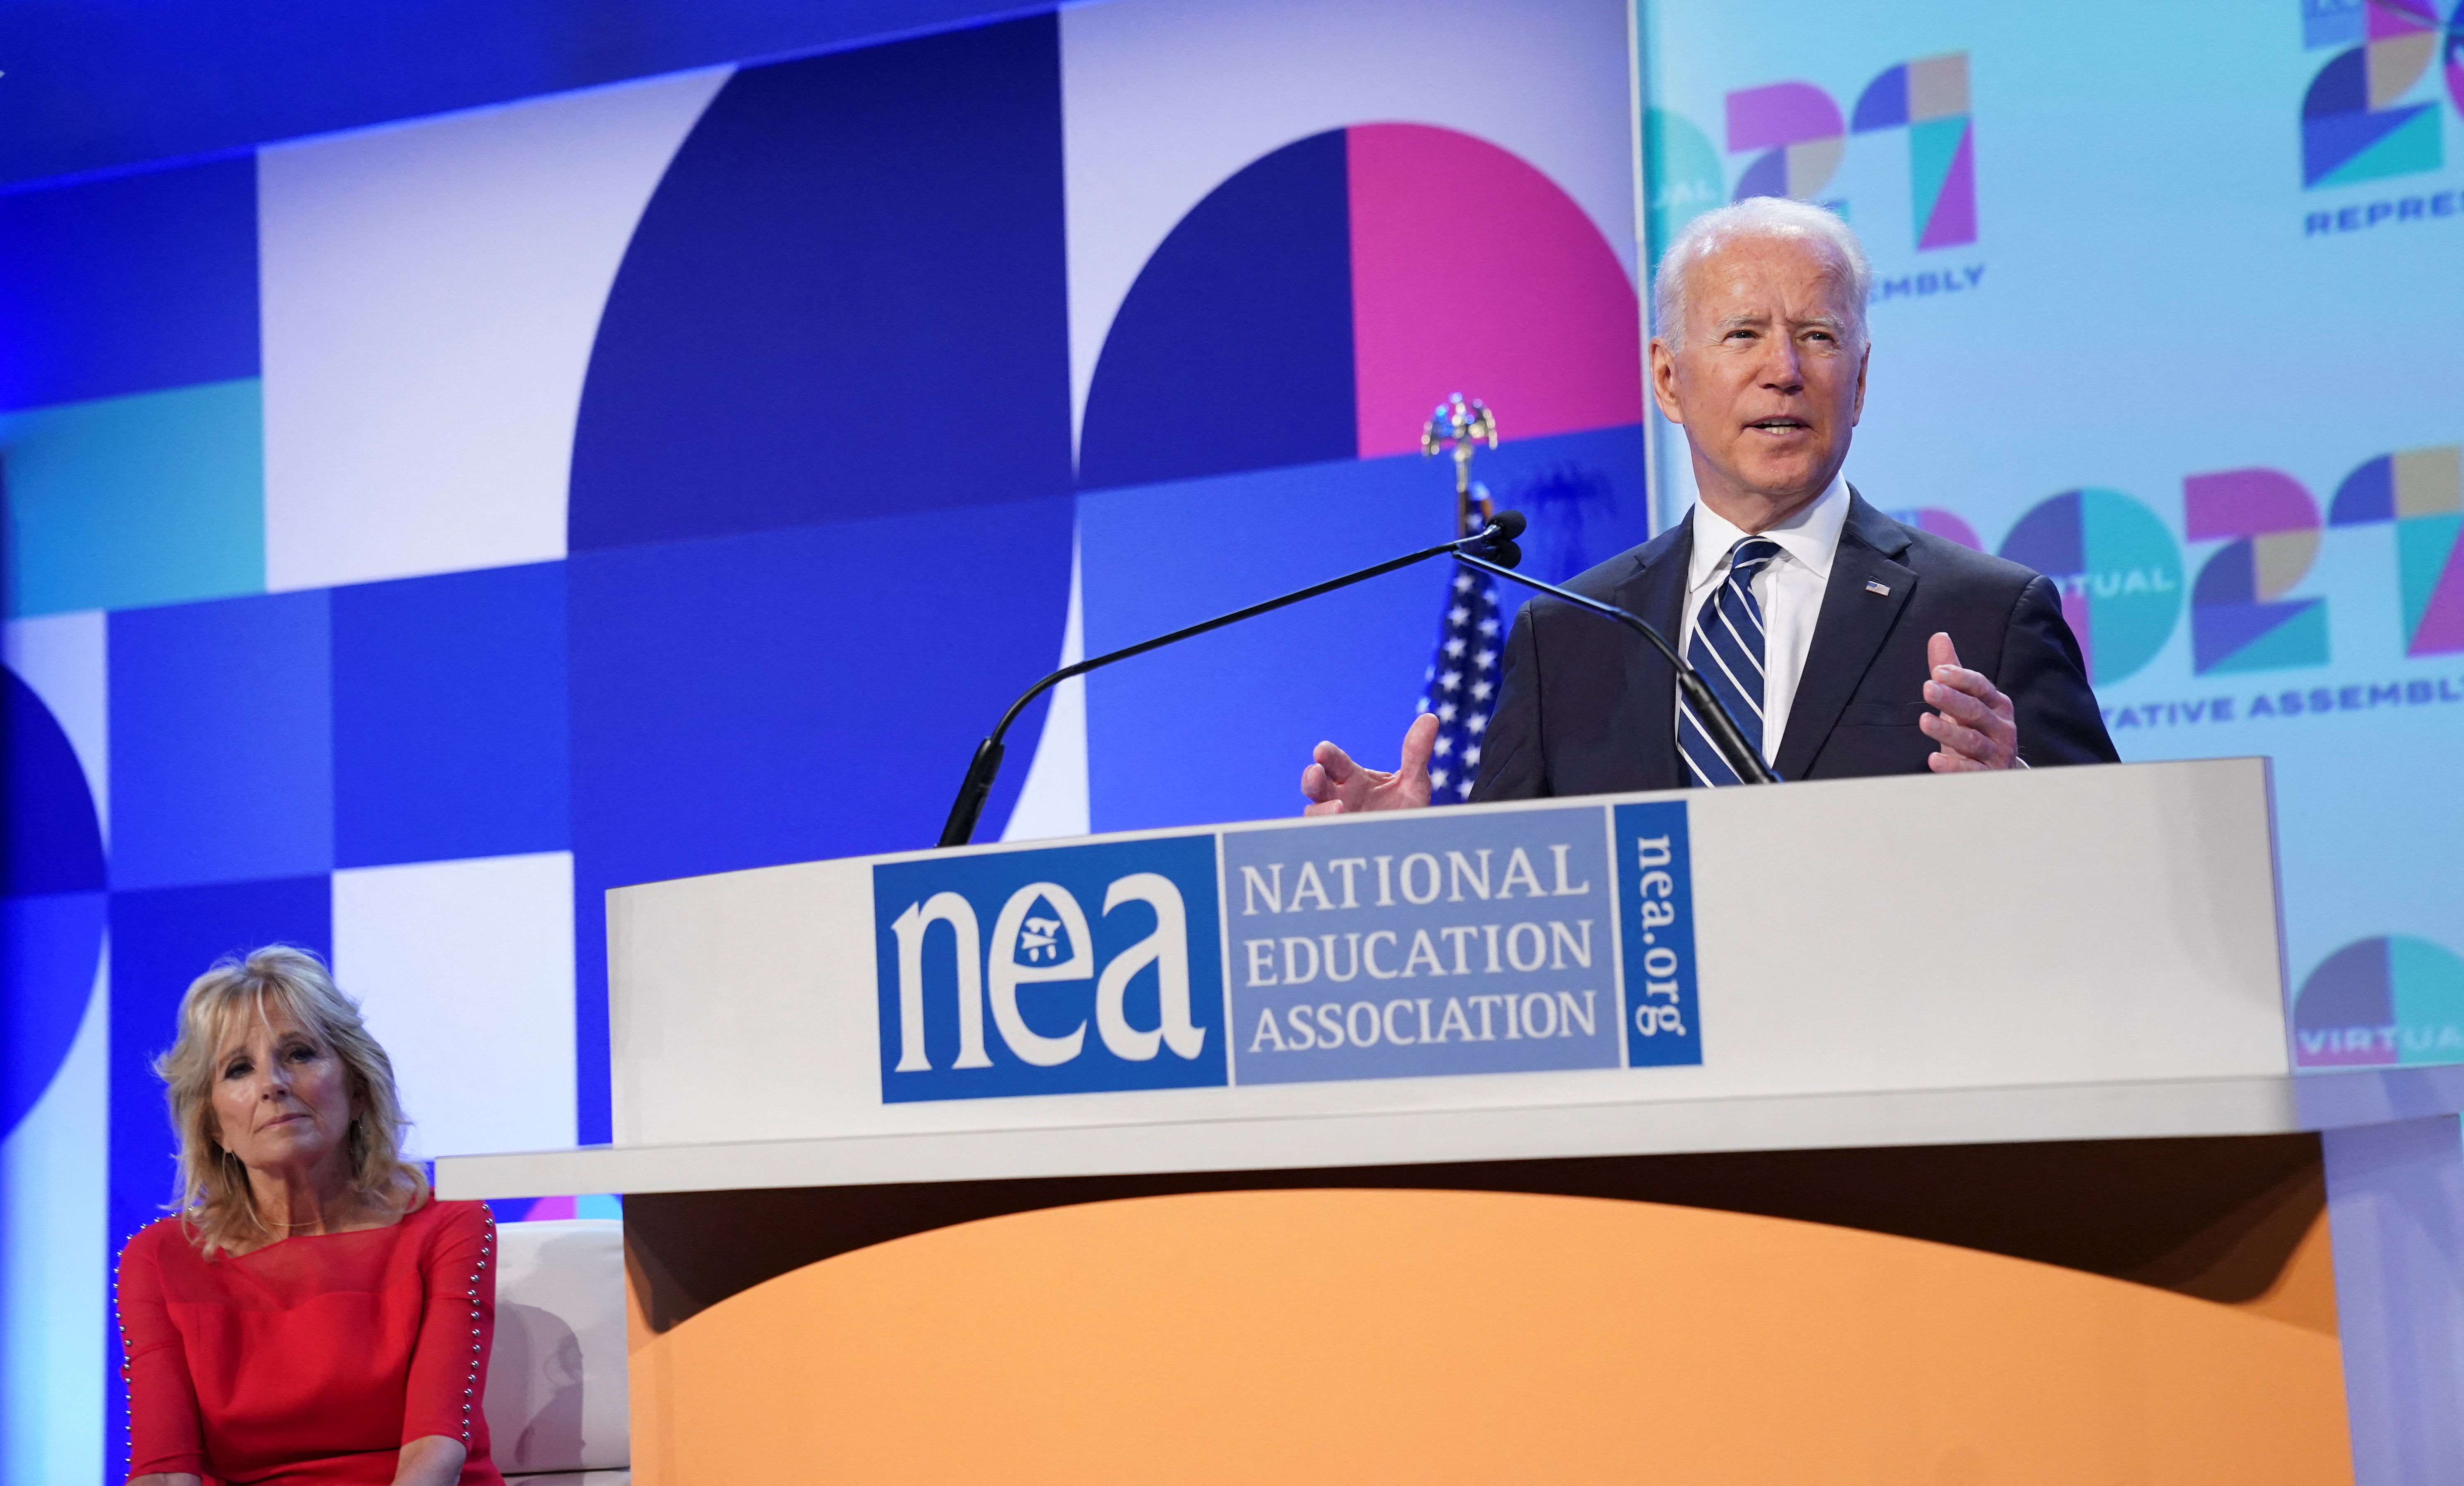 President Biden attends the National Education Association's Annual Meeting and Representative Assembly in Washington